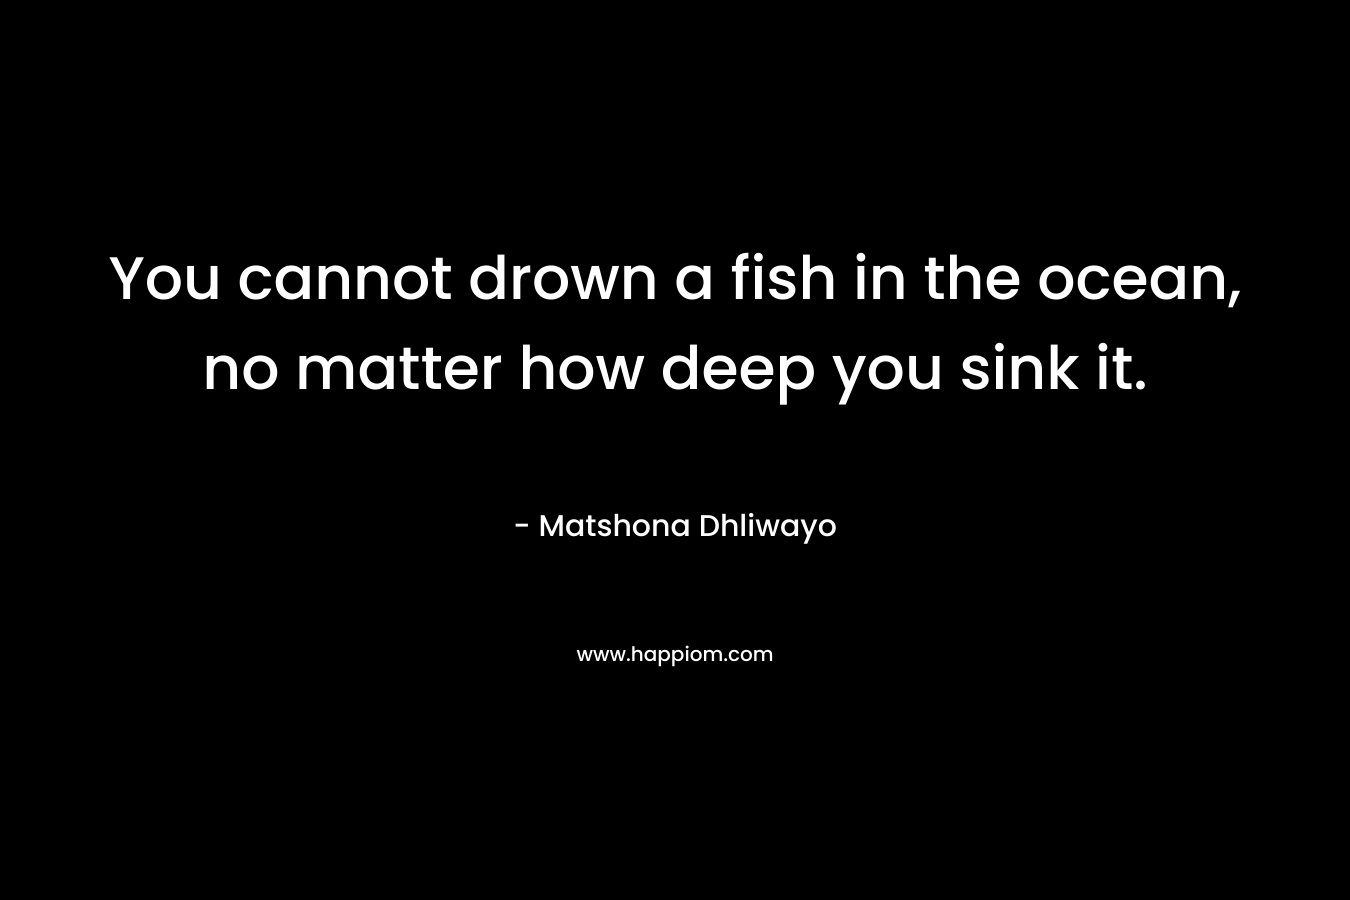 You cannot drown a fish in the ocean, no matter how deep you sink it.